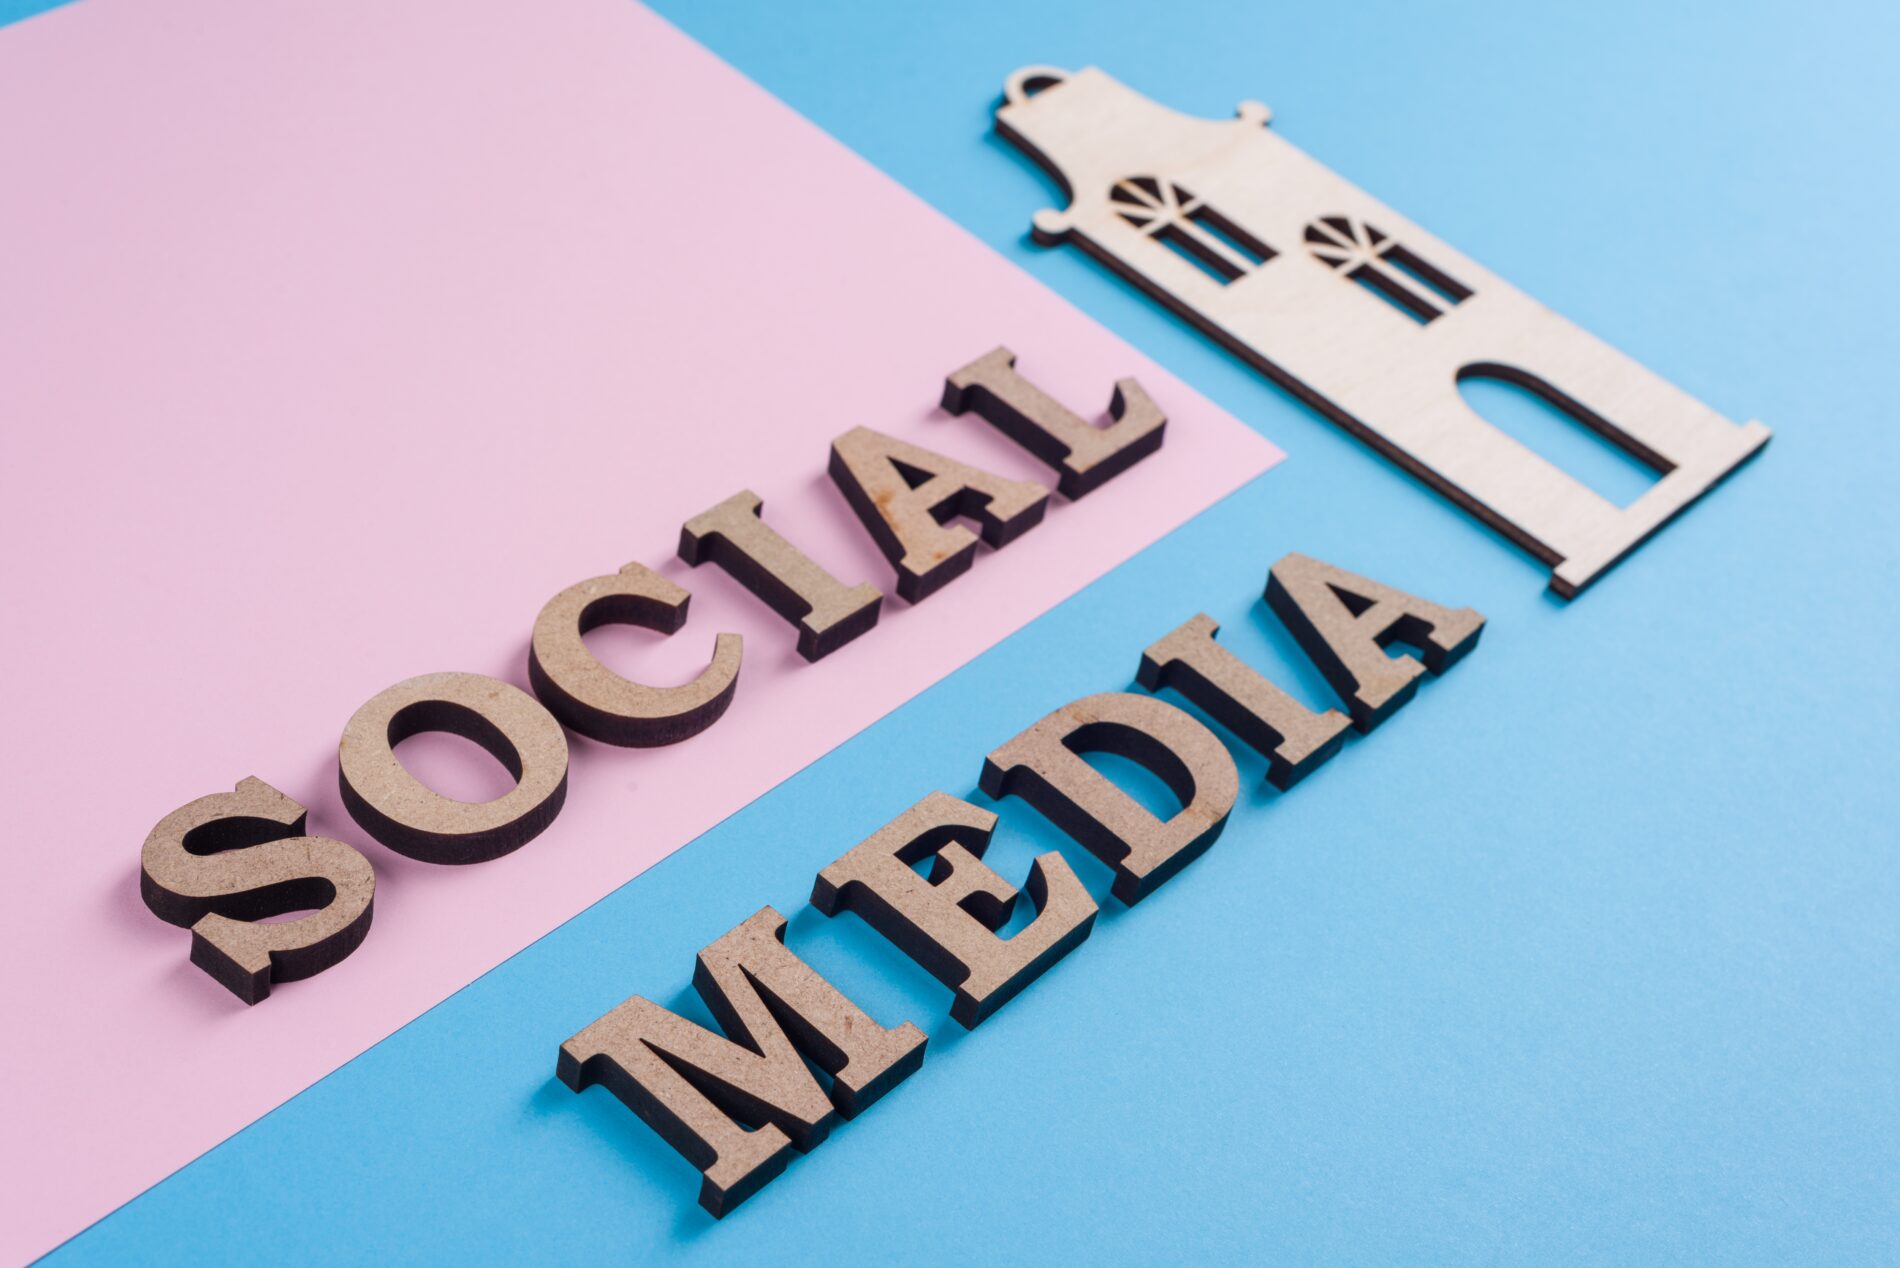 The Dos and Don’ts of Social Media Marketing in Texas